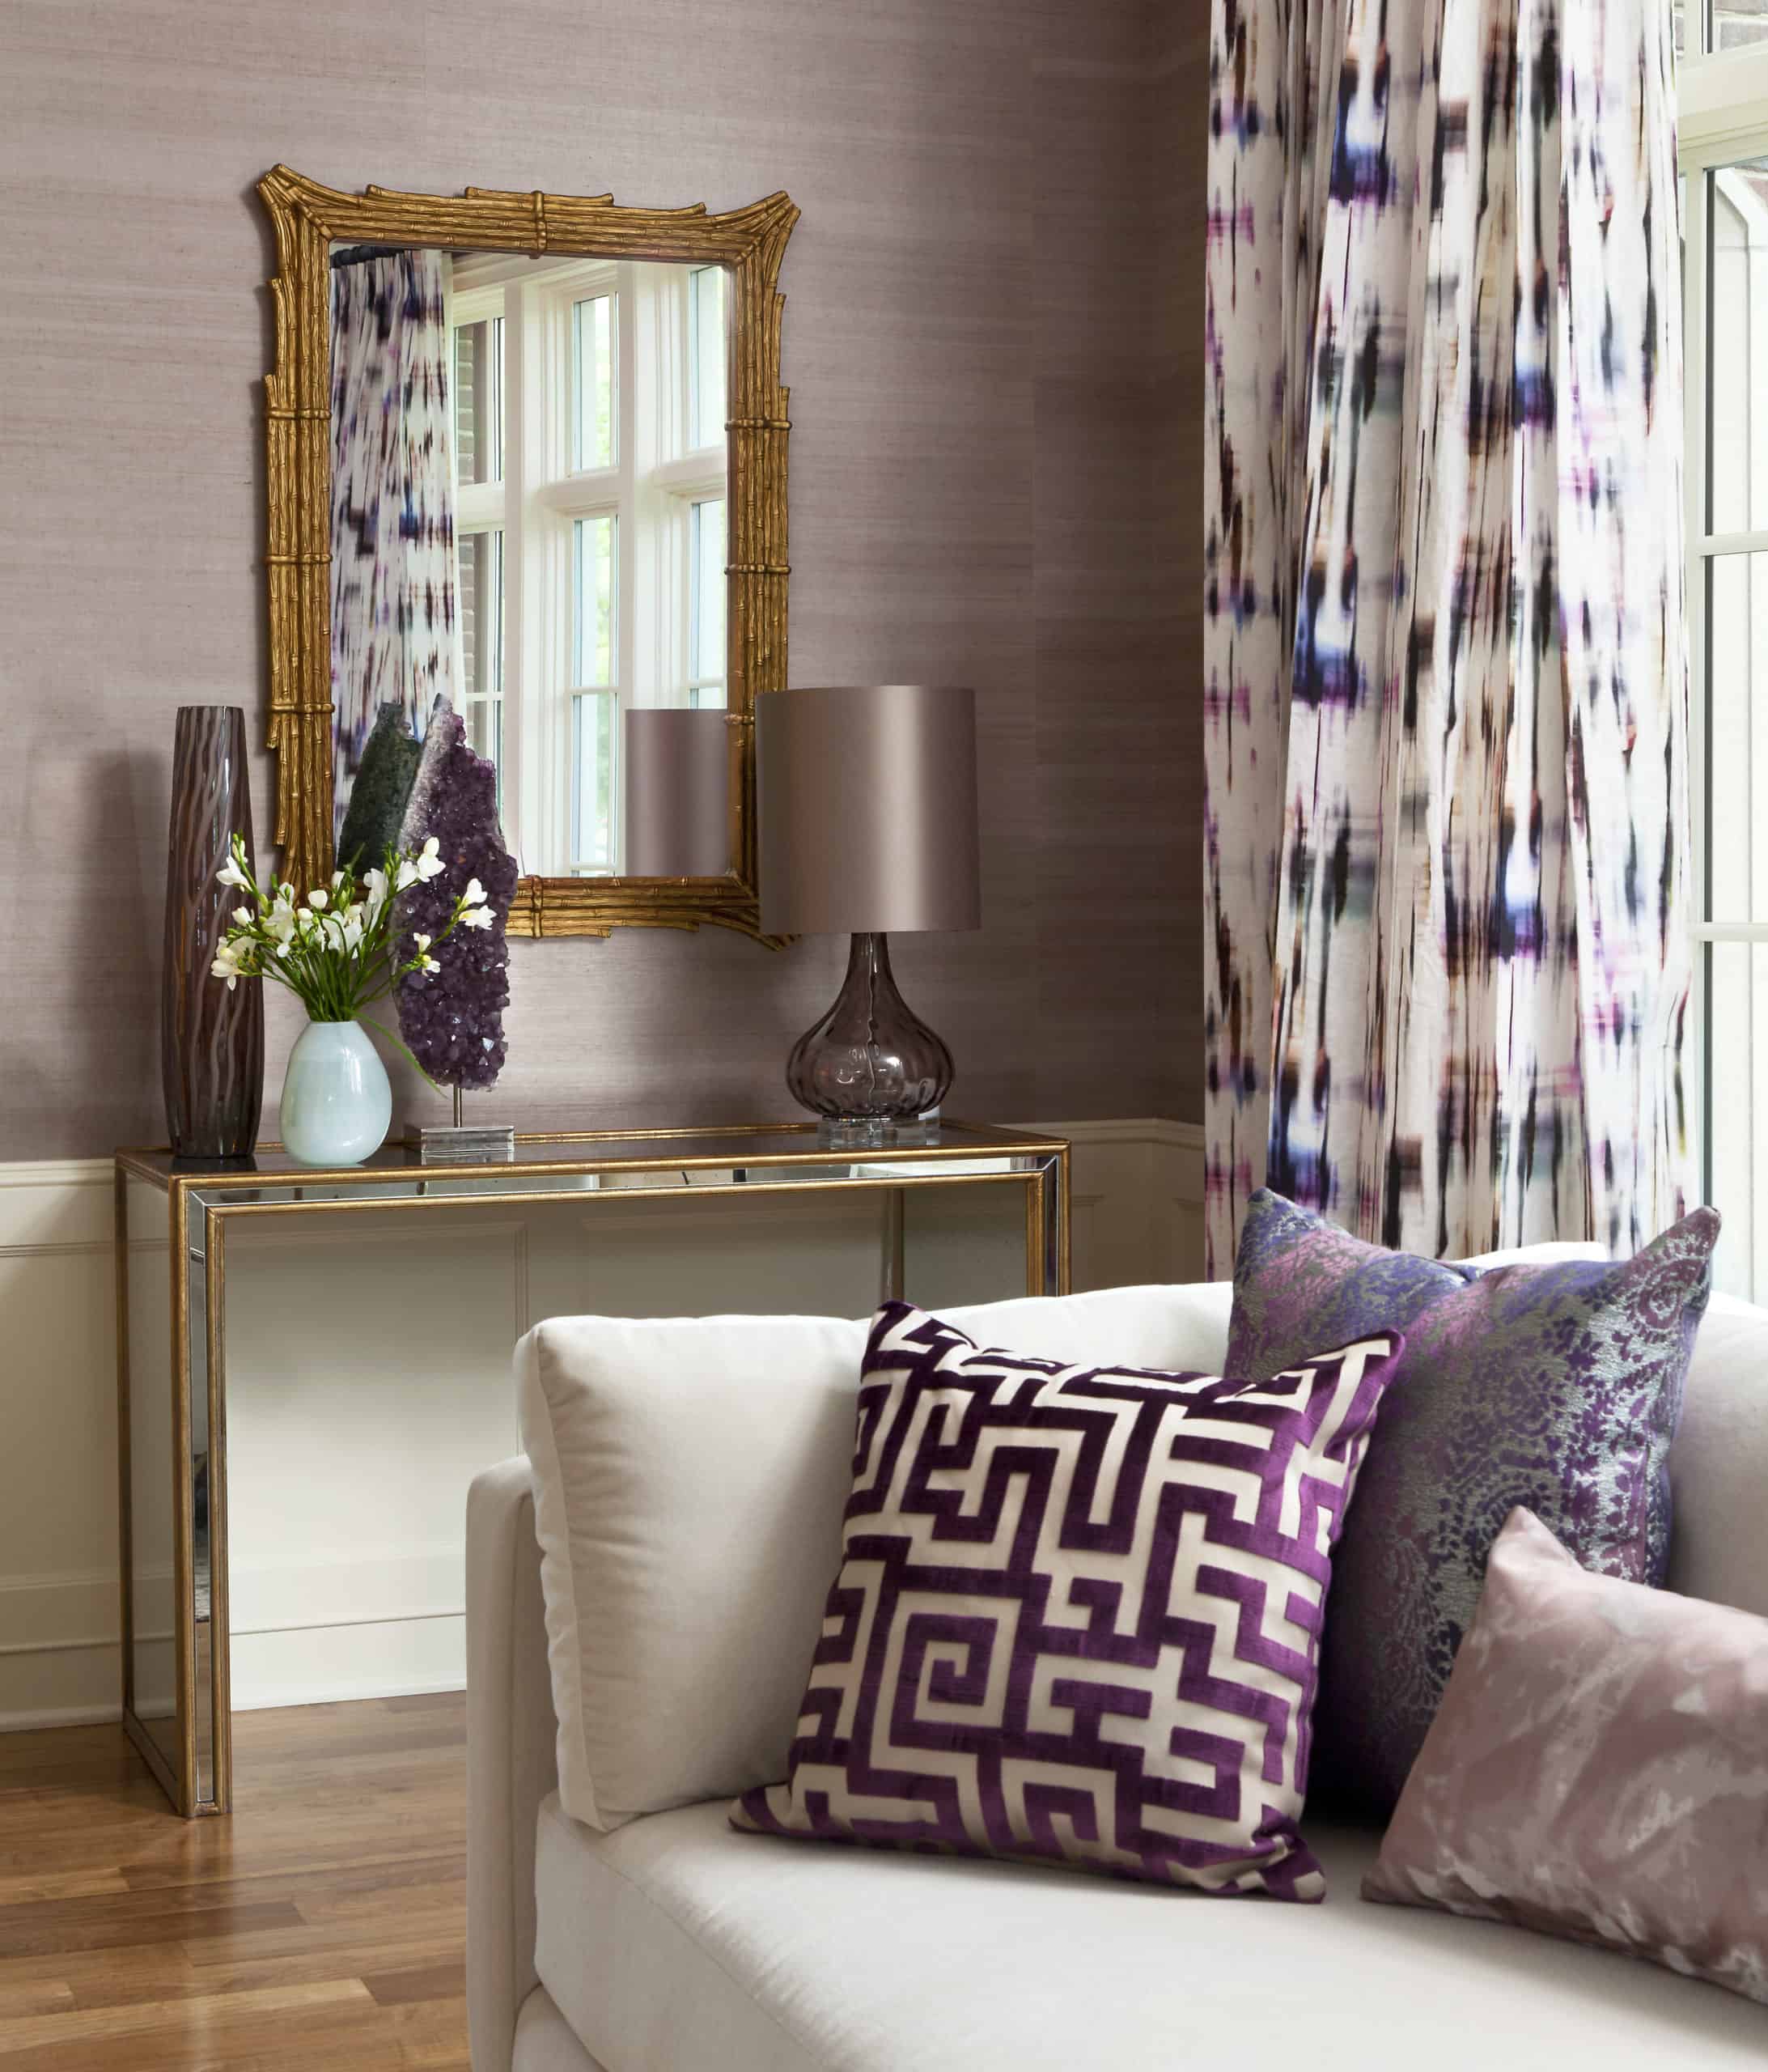 Cream and purple living room with metal accent decor